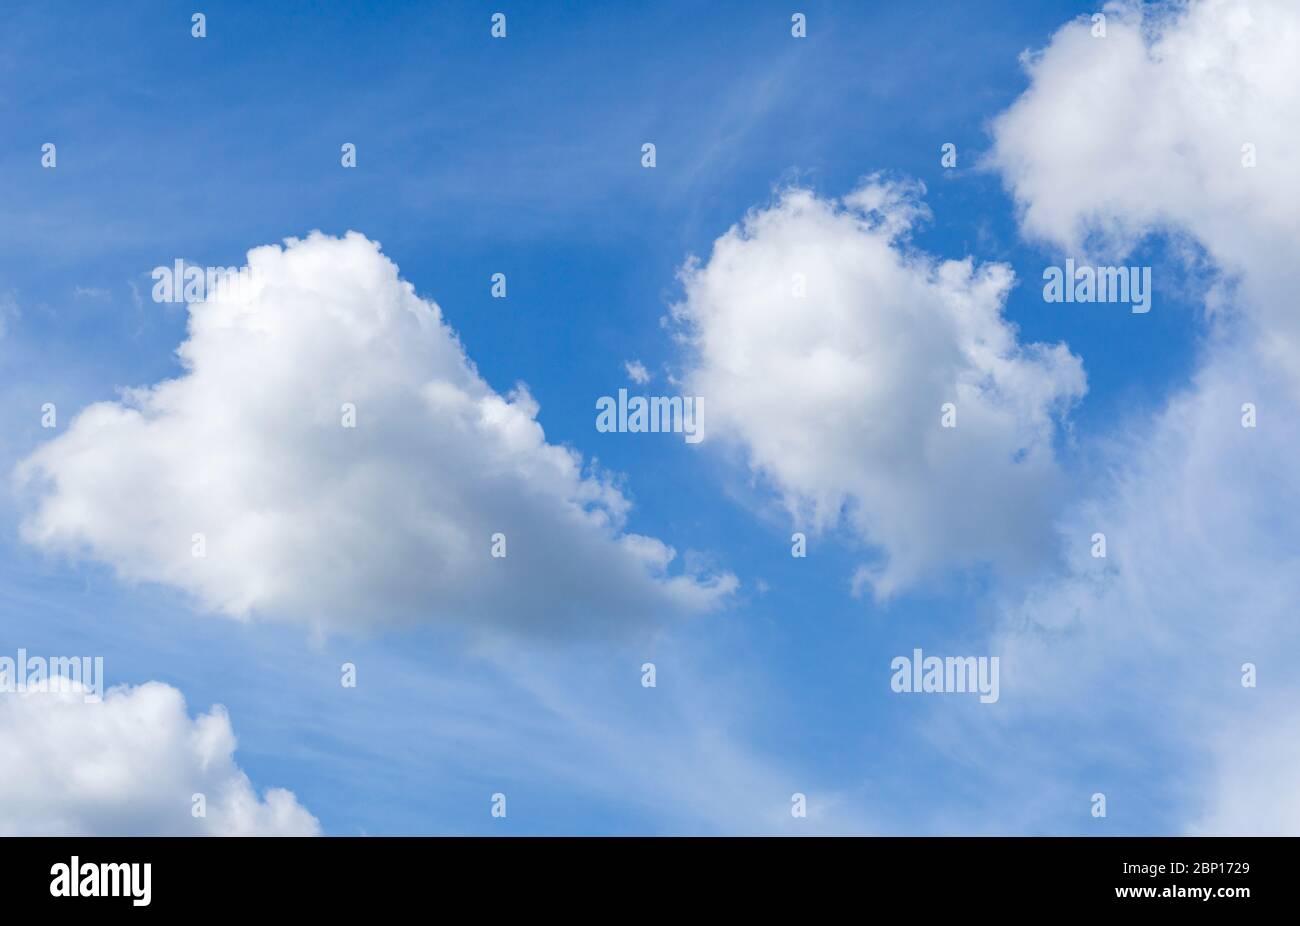 Clean air and white clouds on blue sky , Finland Stock Photo